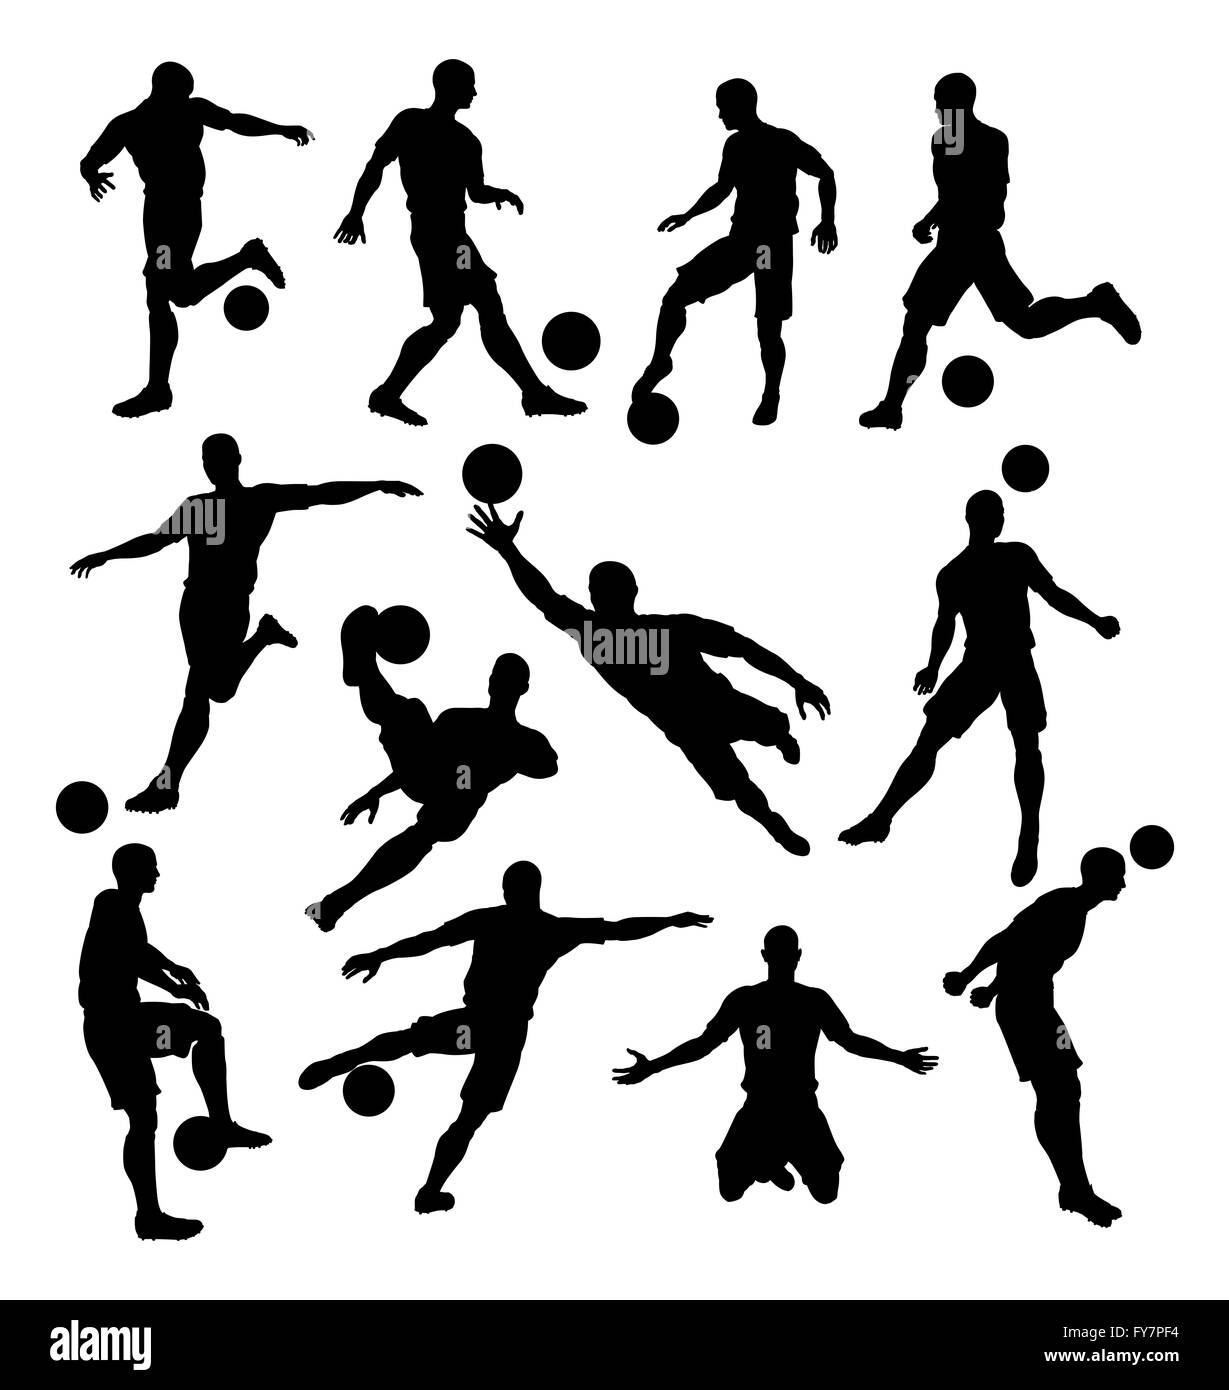 A set of Soccer Player Silhouettes in lots of different poses Stock Photo